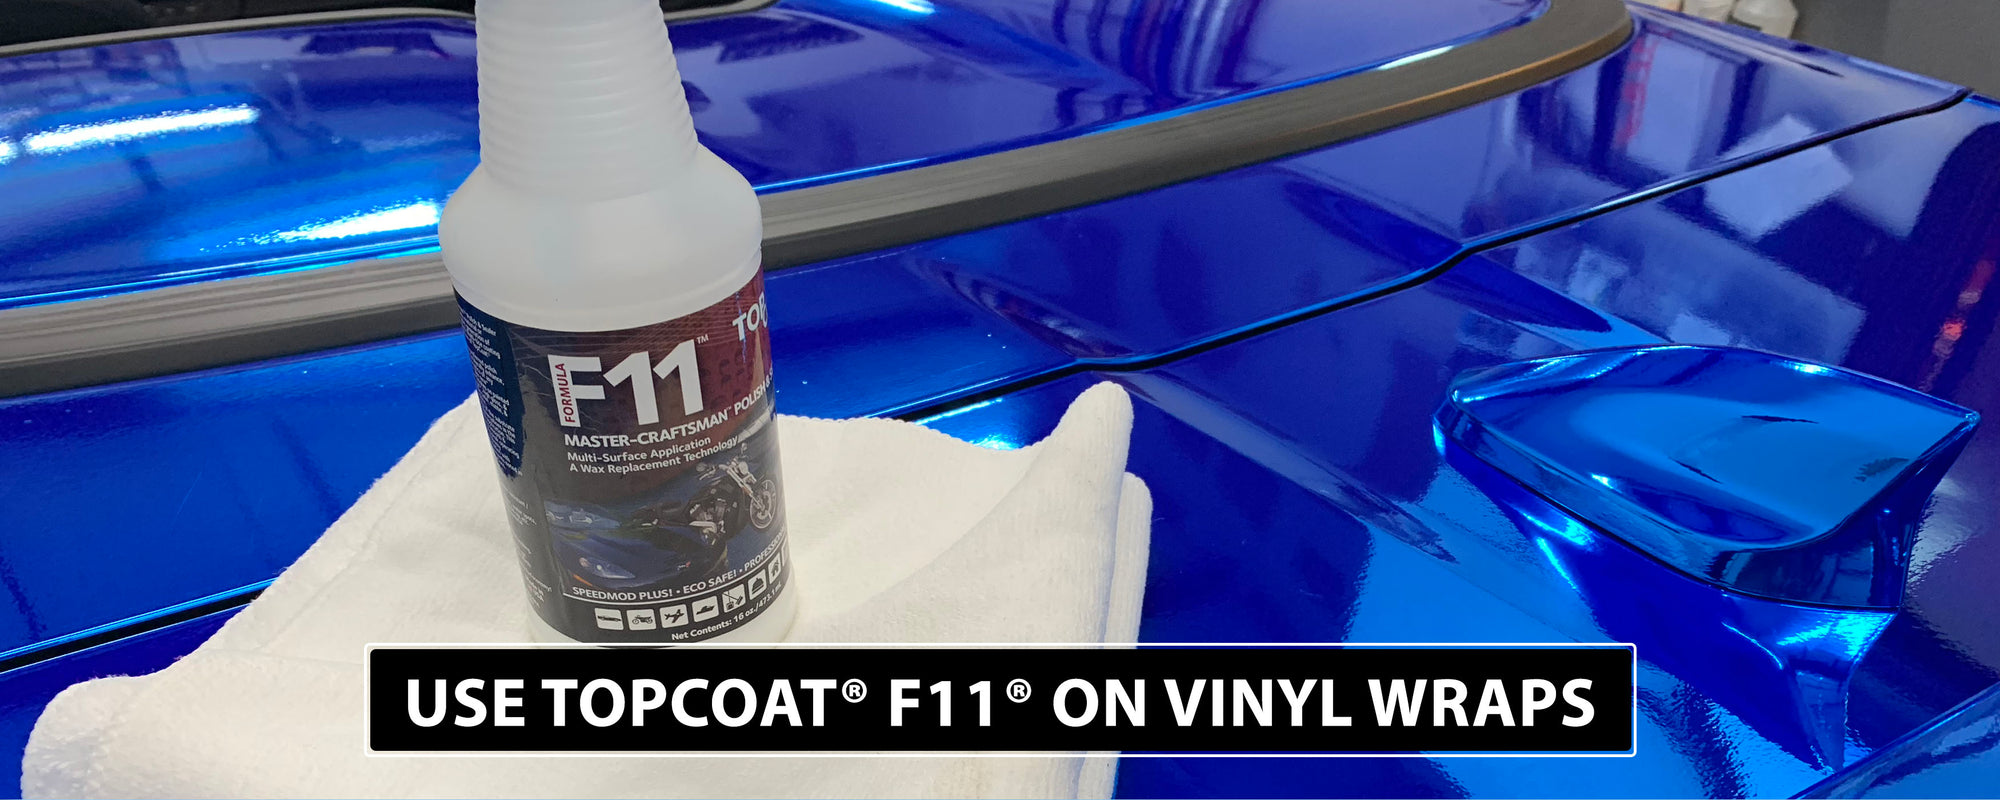 Did You Know TopCoat® F11® Can Be Used on Vinyl Wraps?